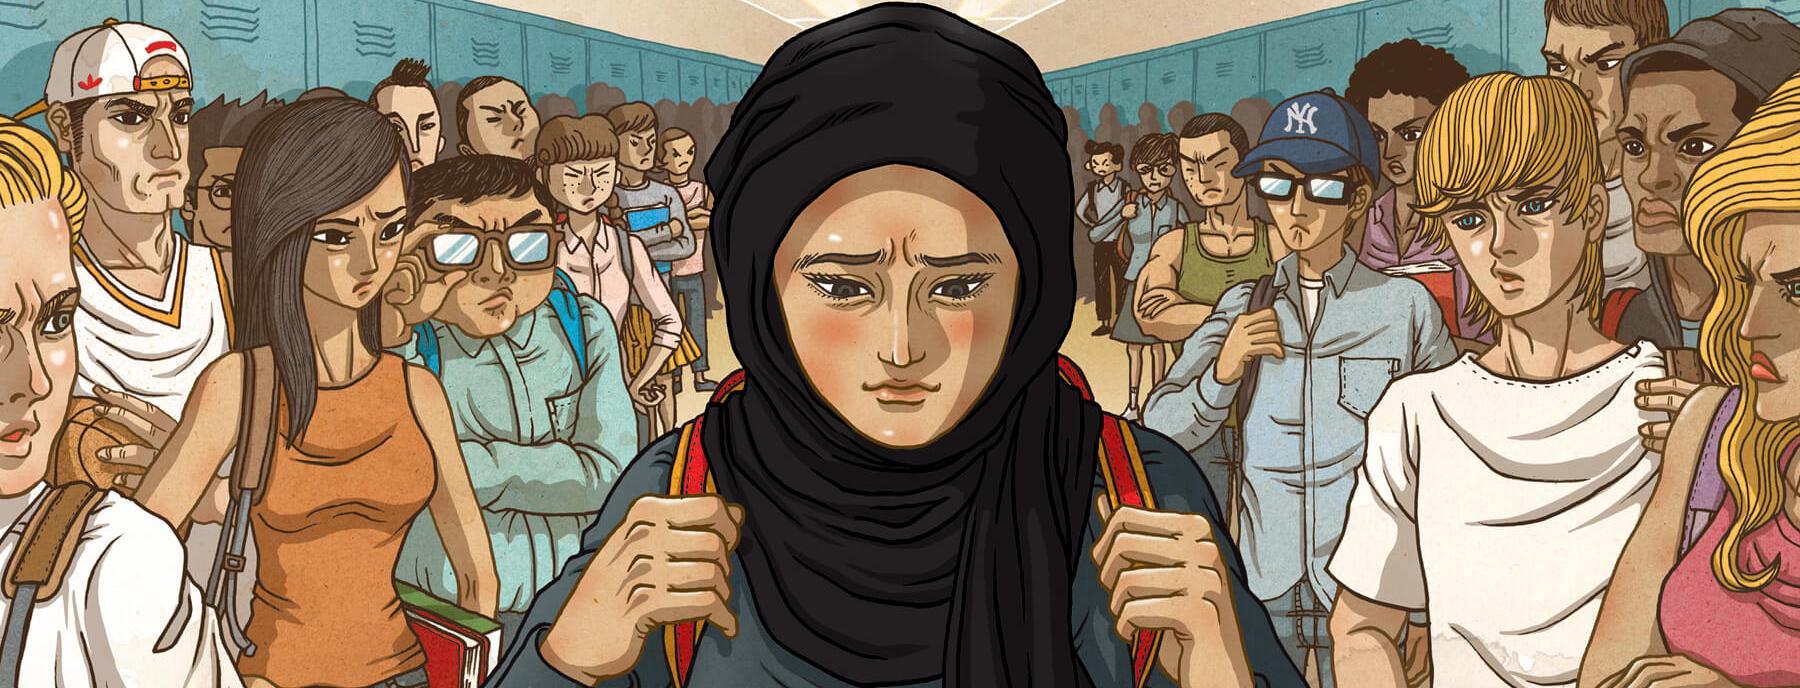 Overcoming Bullying 2022 Survey & Report Campaign - CAIR-TX Austin & DFW